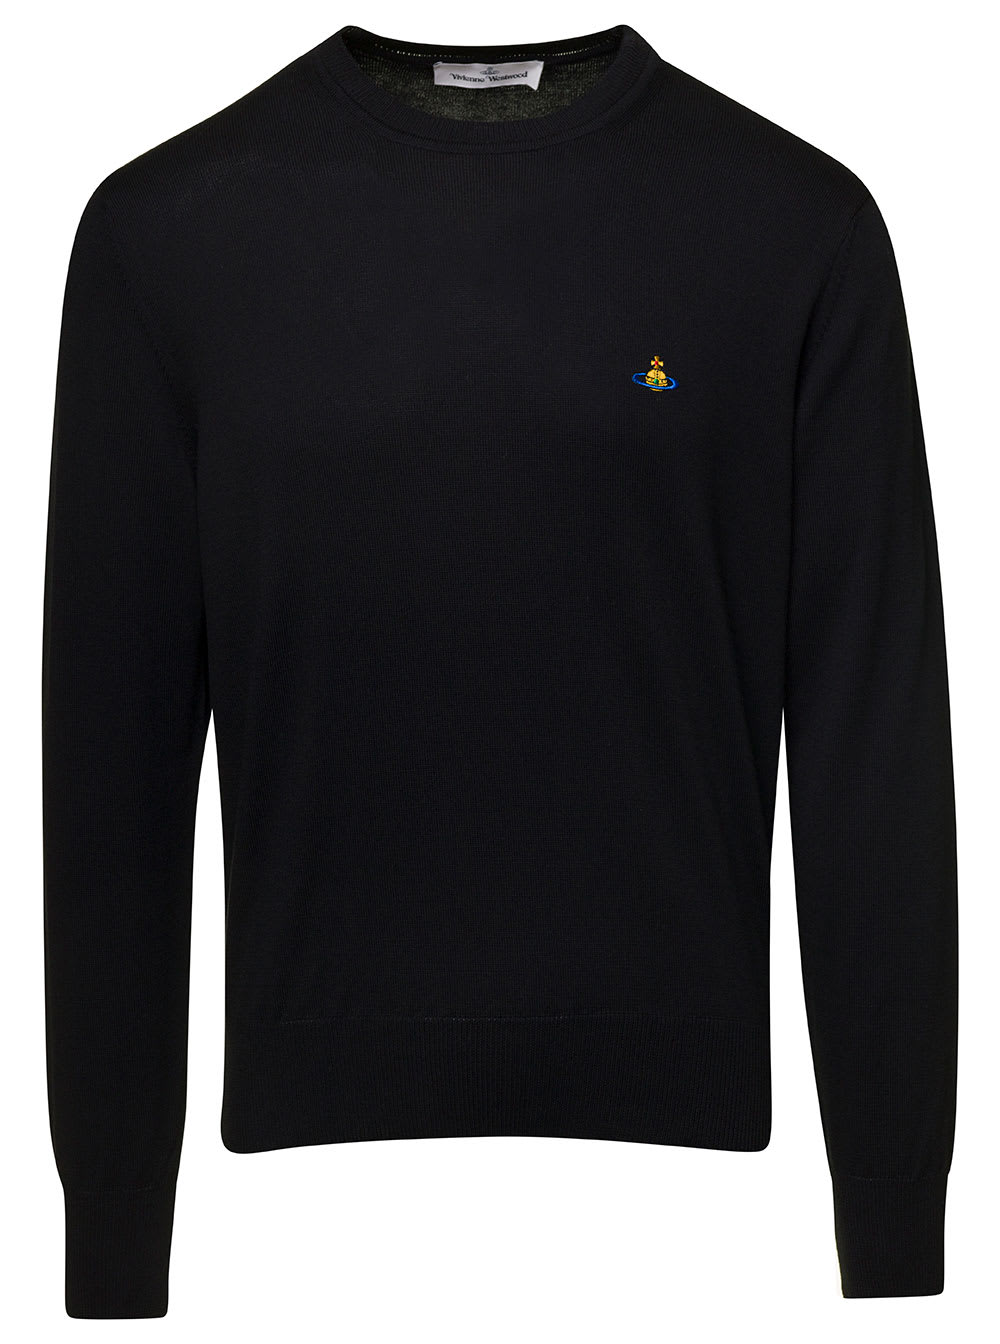 Vivienne Westwood Black Crewneck Sweater With Embroidered Logo In Wool Blend Man